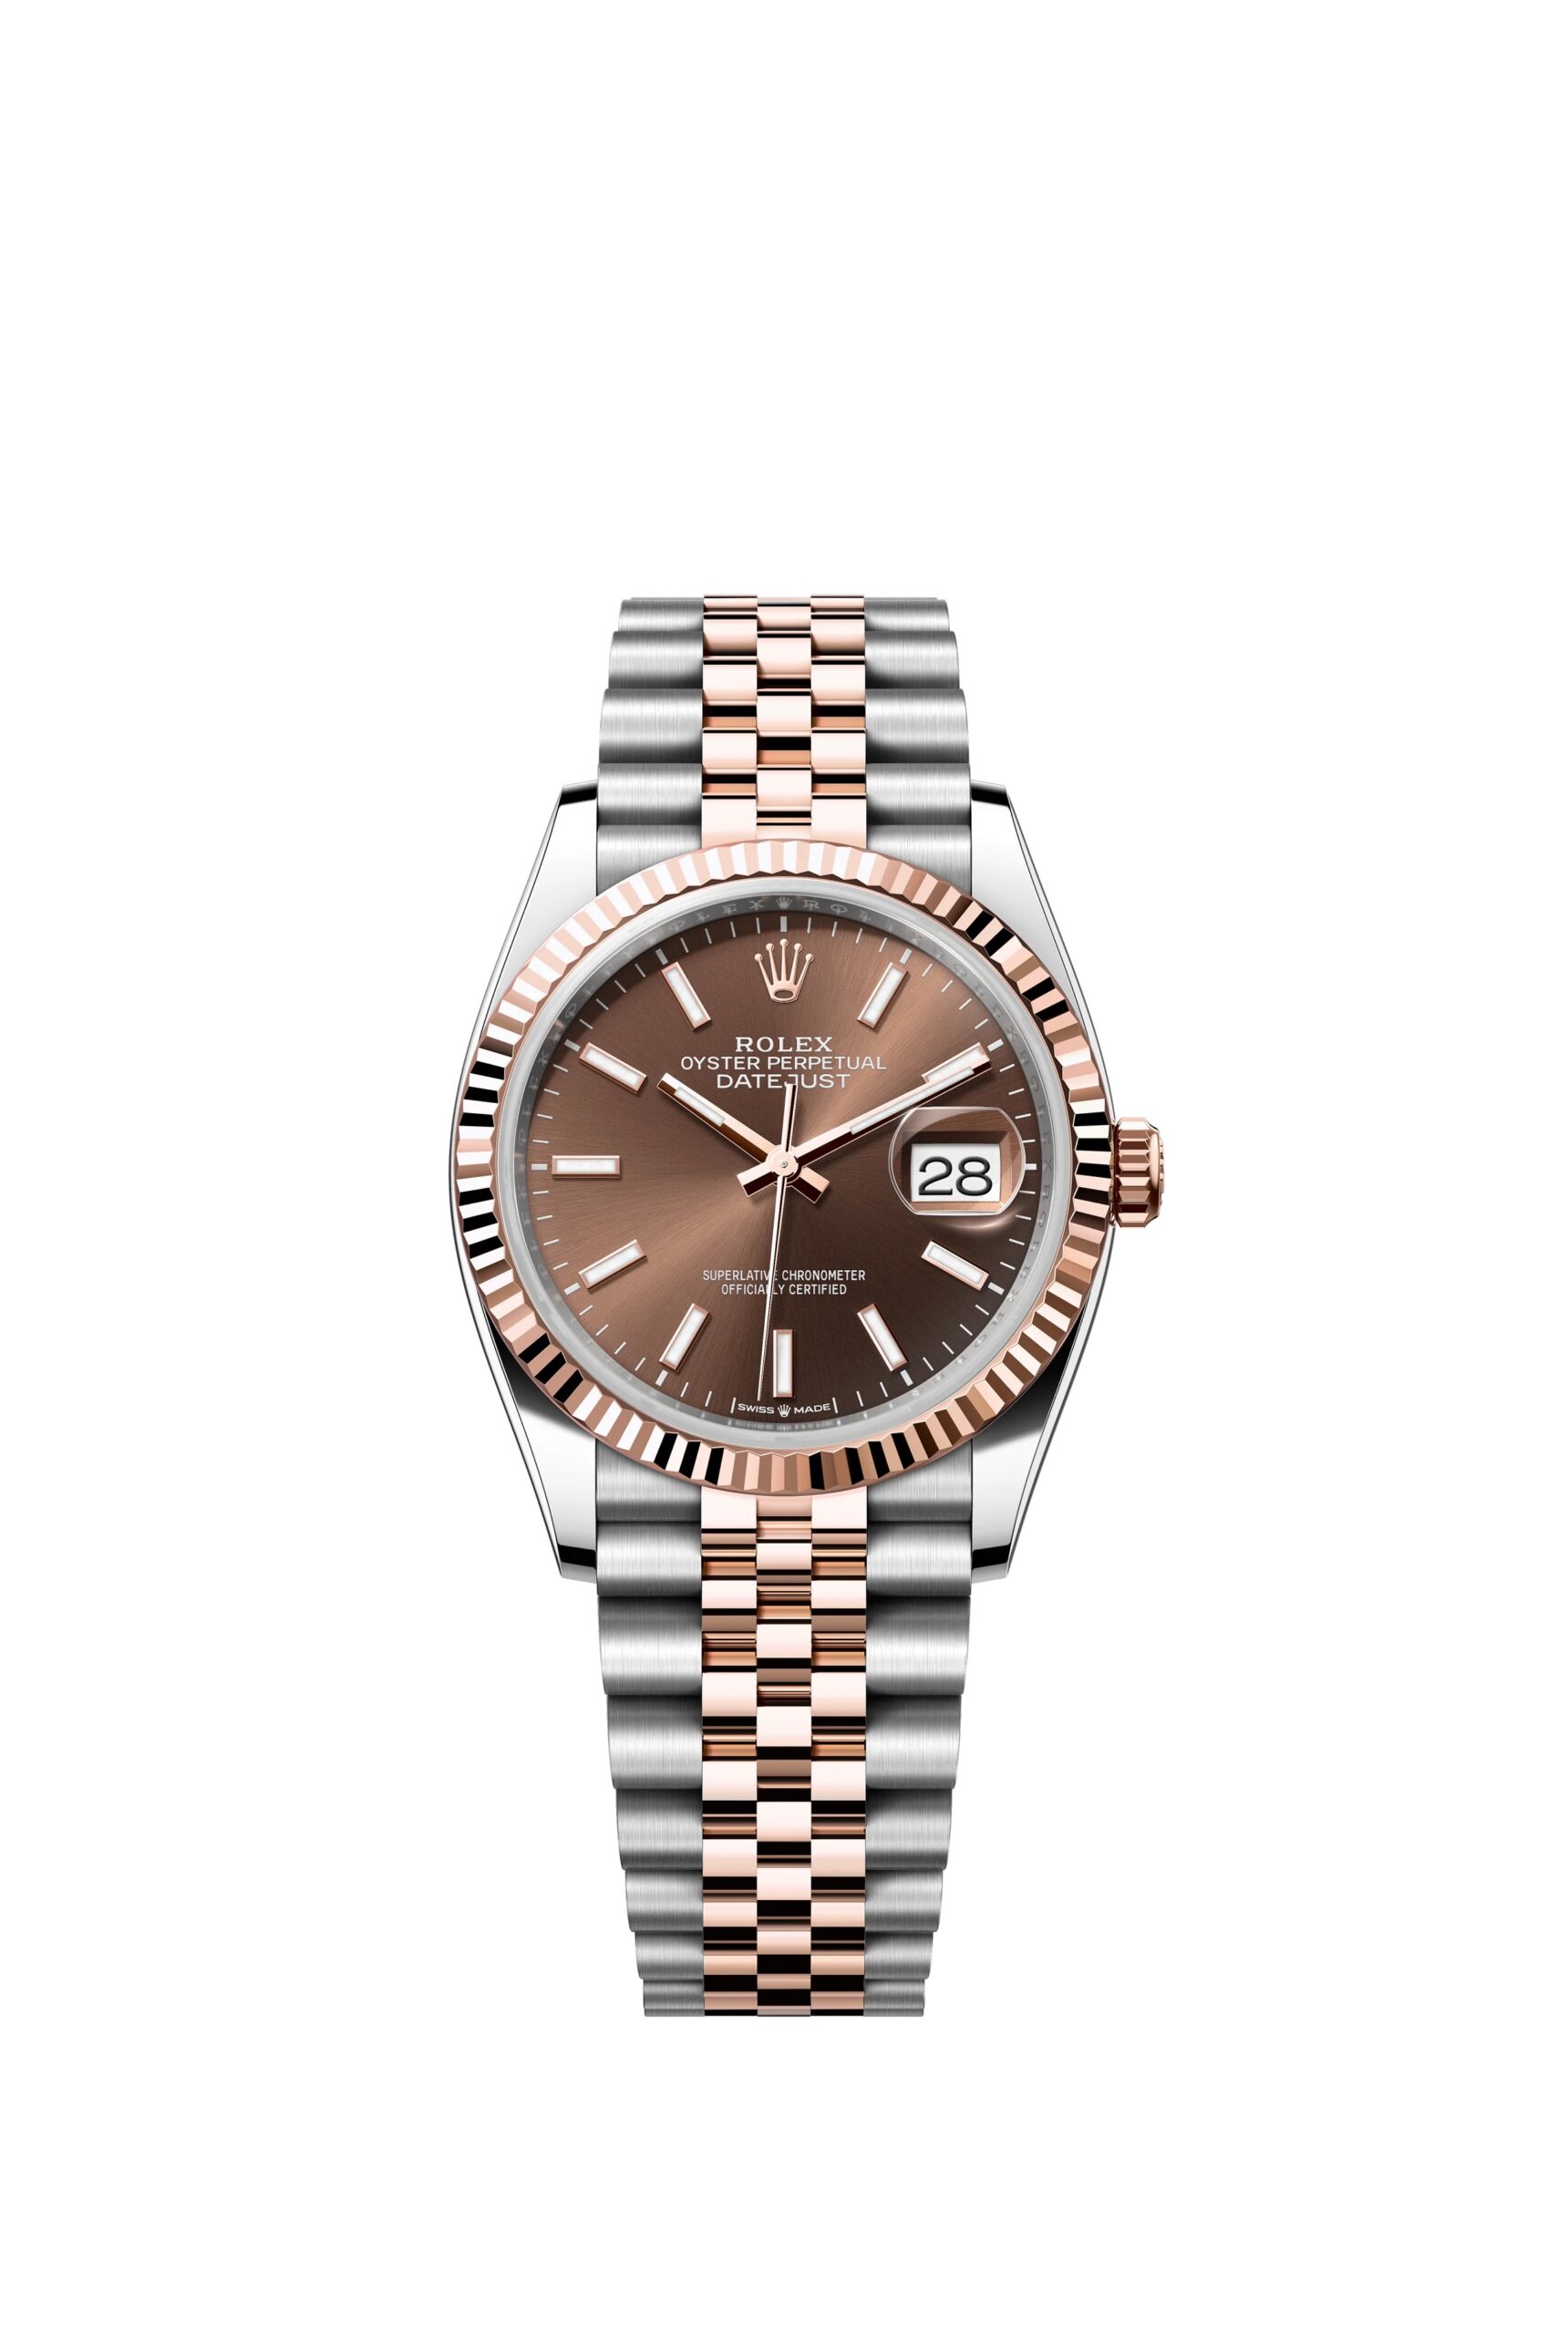 Rolex Datejust 36 Oyster, 36 mm, Oystersteel and Everose gold Reference 126231